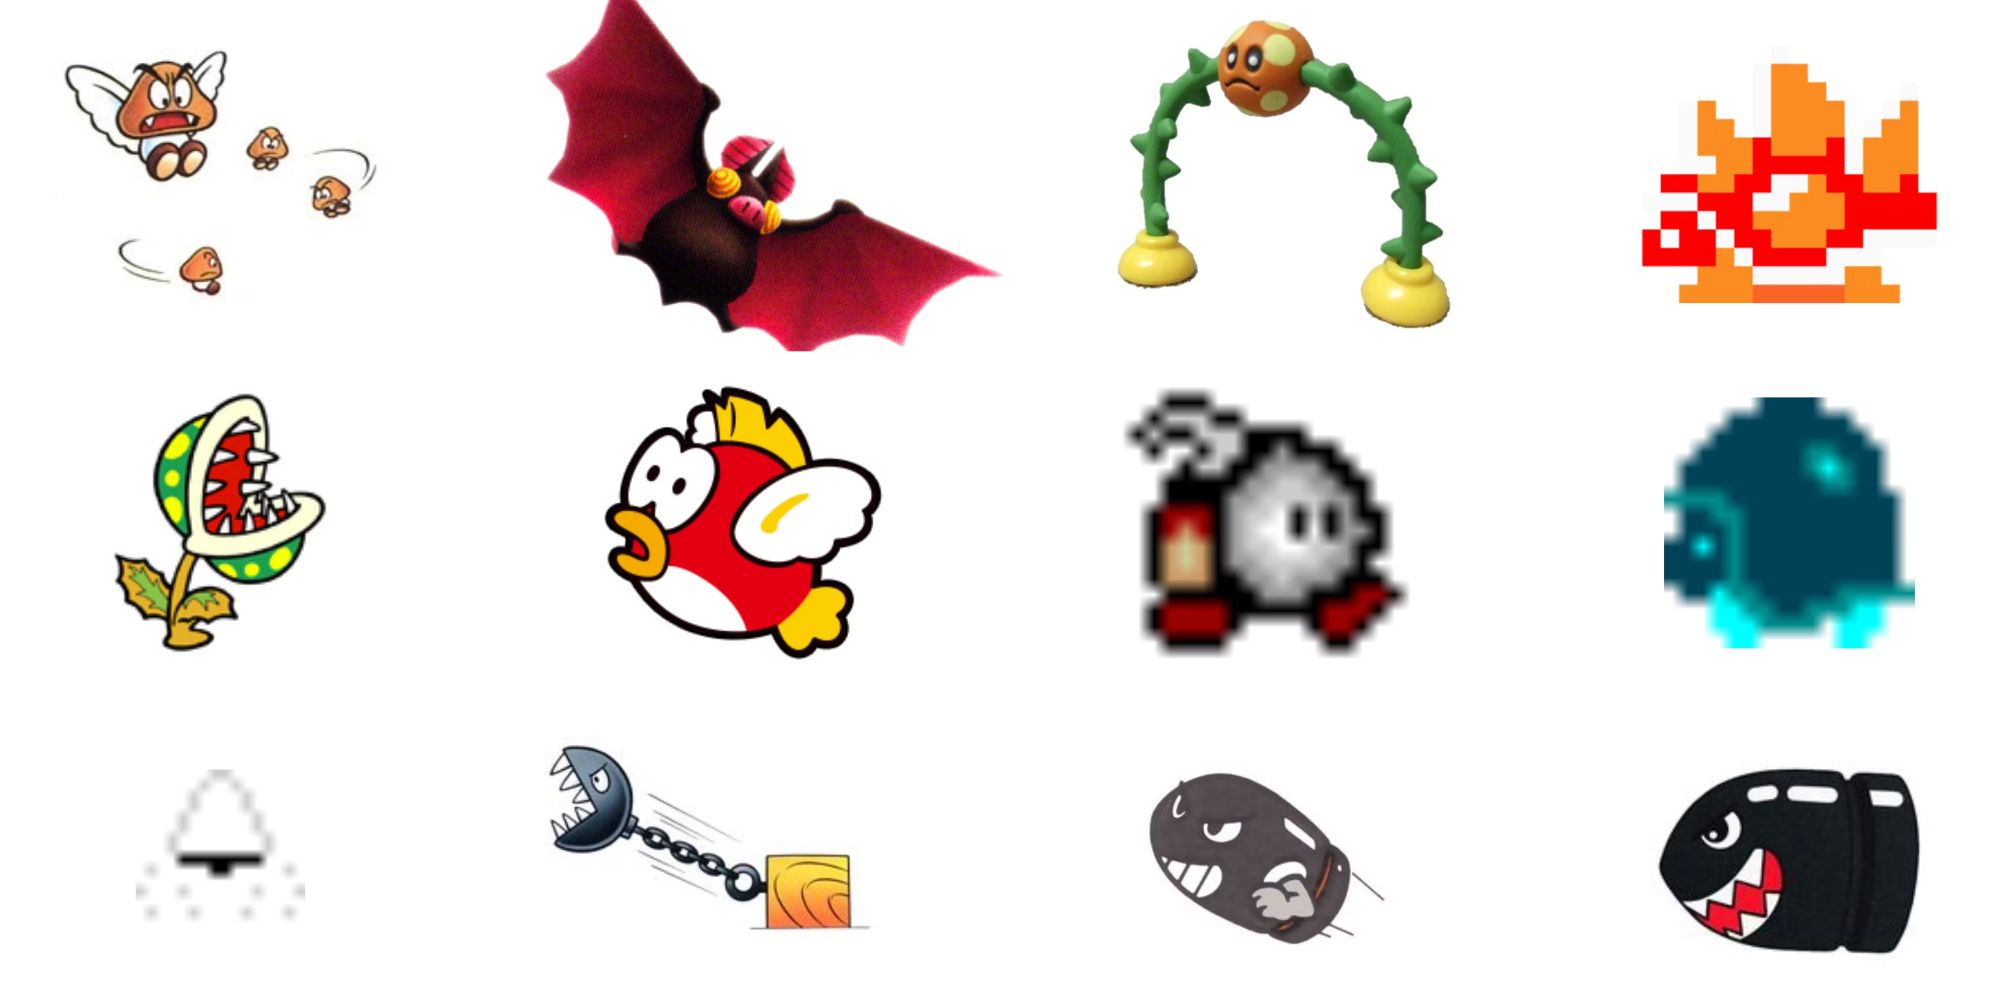 A diverse line-up of Mario enemies in different art styles